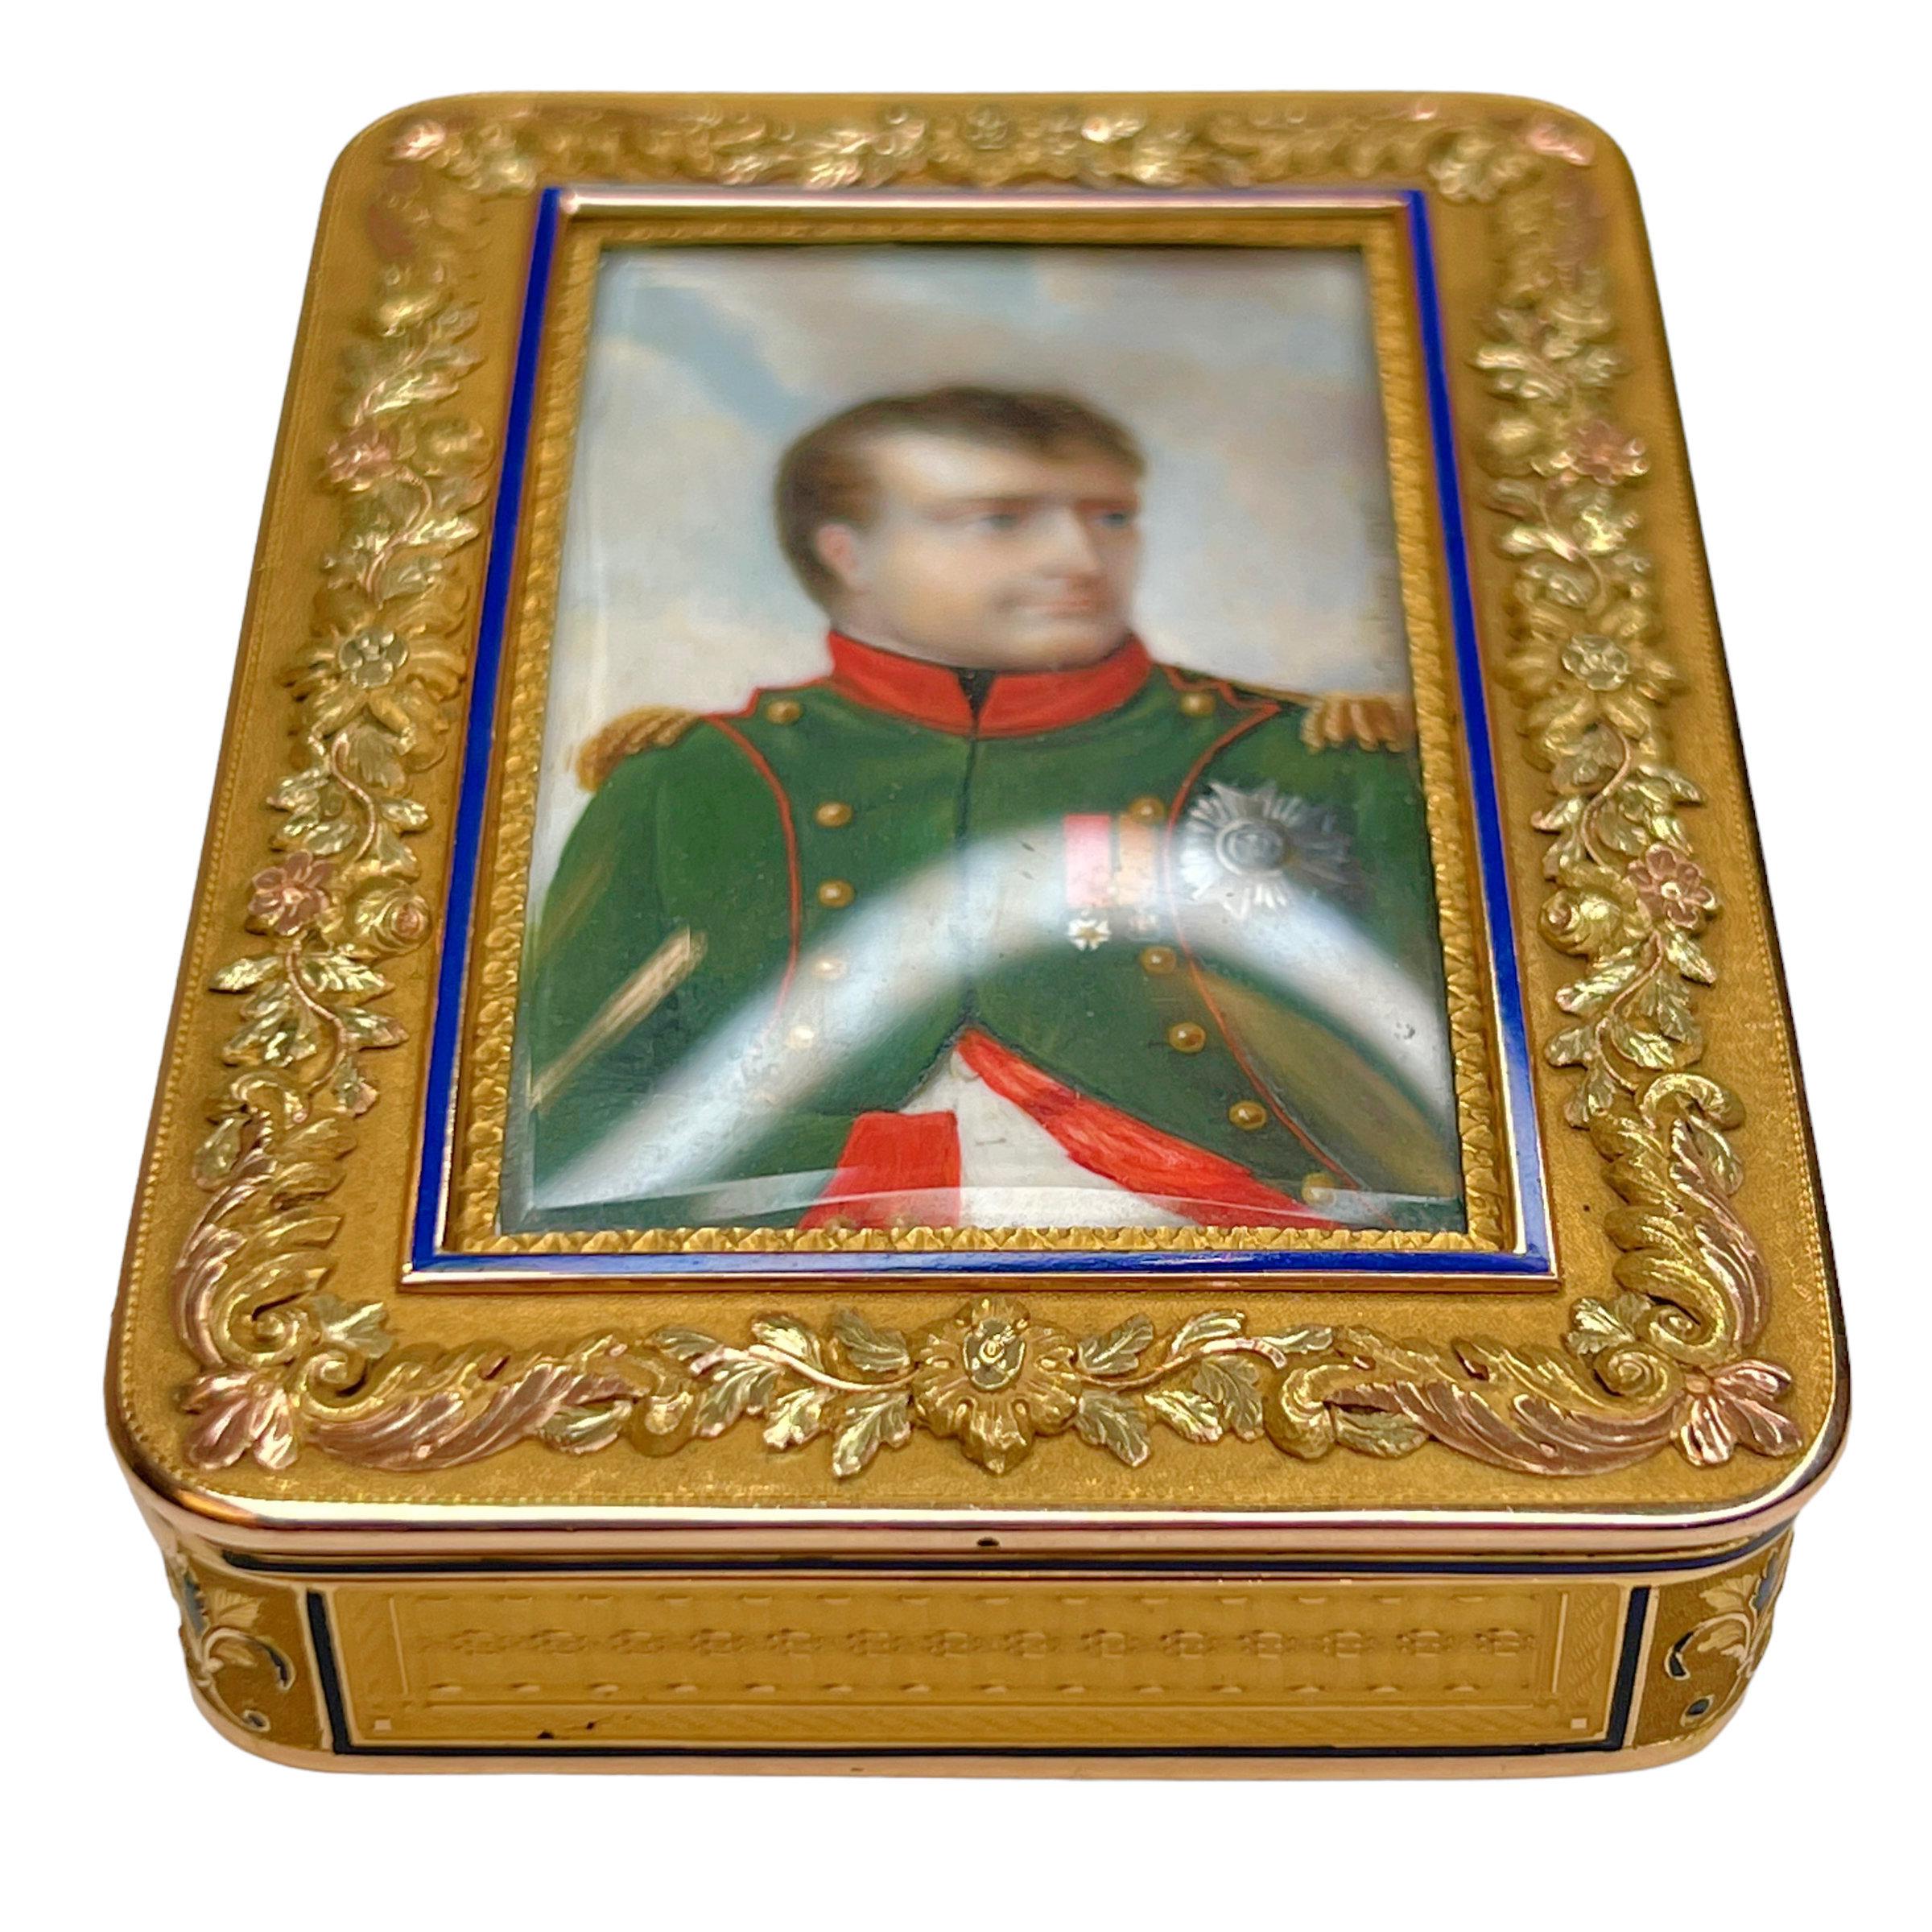 Our gold snuff box is distinguished by its exceptional portrait of Emperor Napoleon I (1769-1821) by the revered miniature painter, Jean-Baptiste Isabey (1767–1855), signed and dated 1807. Isabey portrays the emperor in the green uniform of the